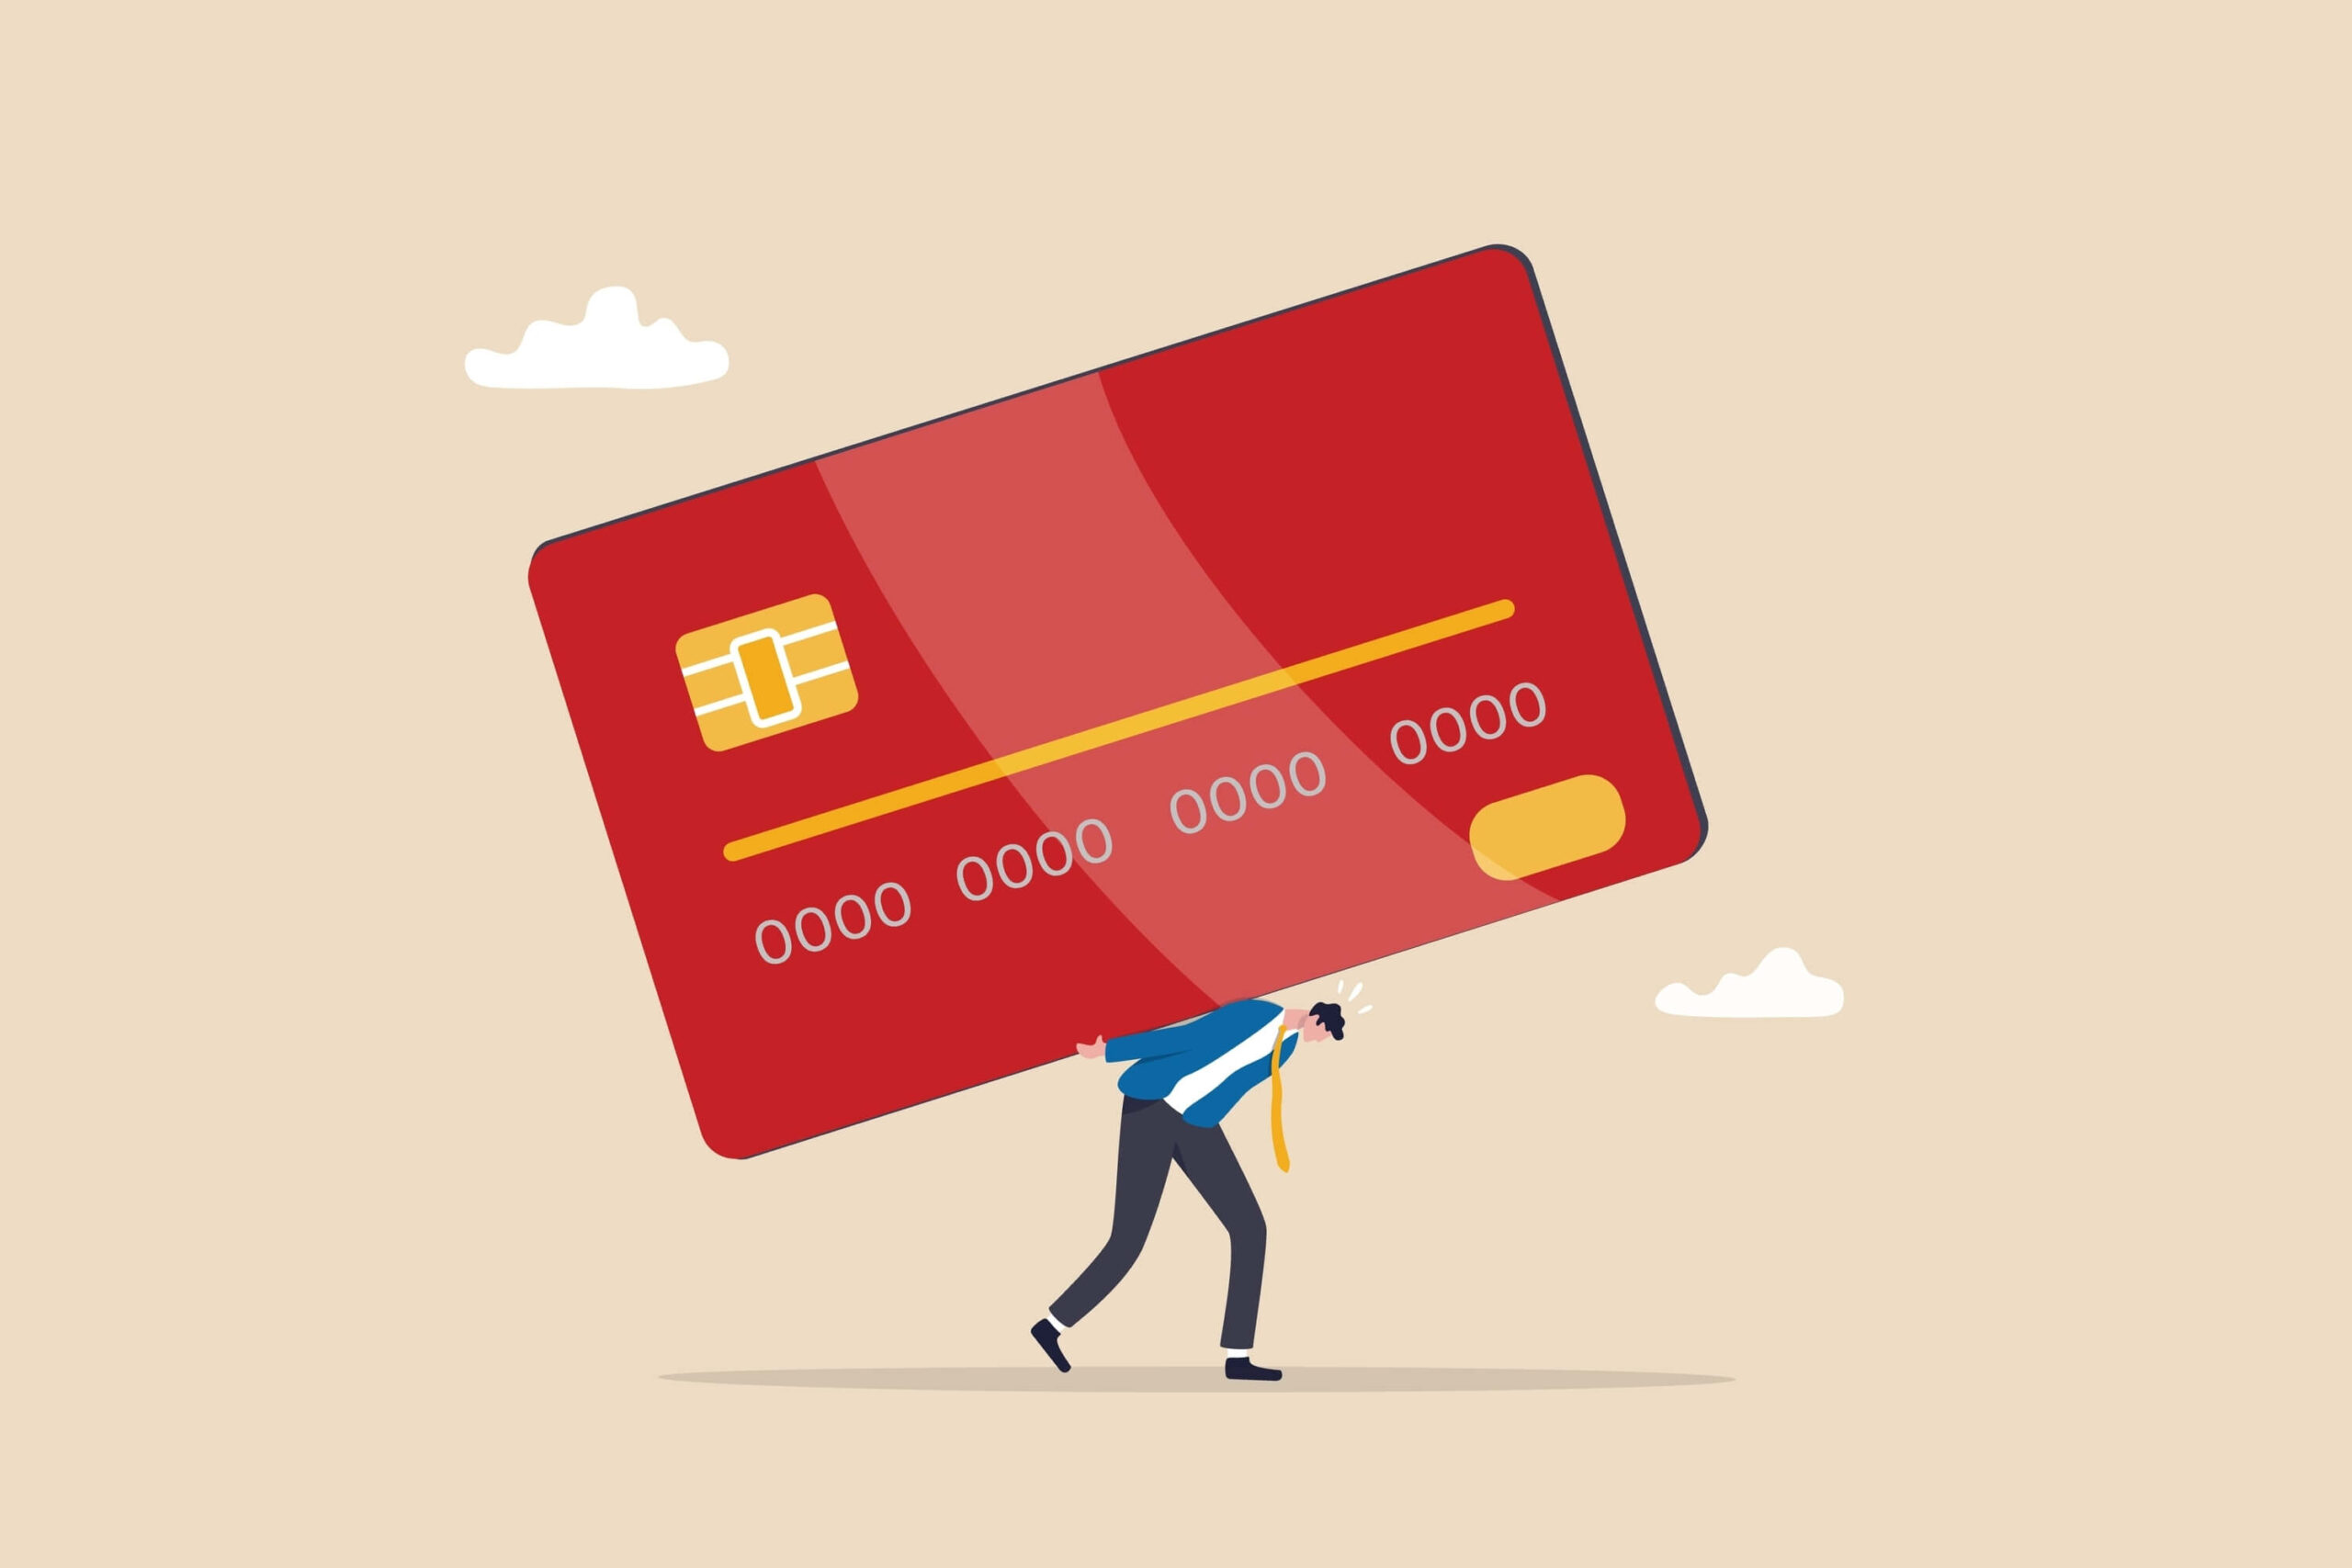 A cartoon image of a man holding a big red credit card on his back struggling to walk 